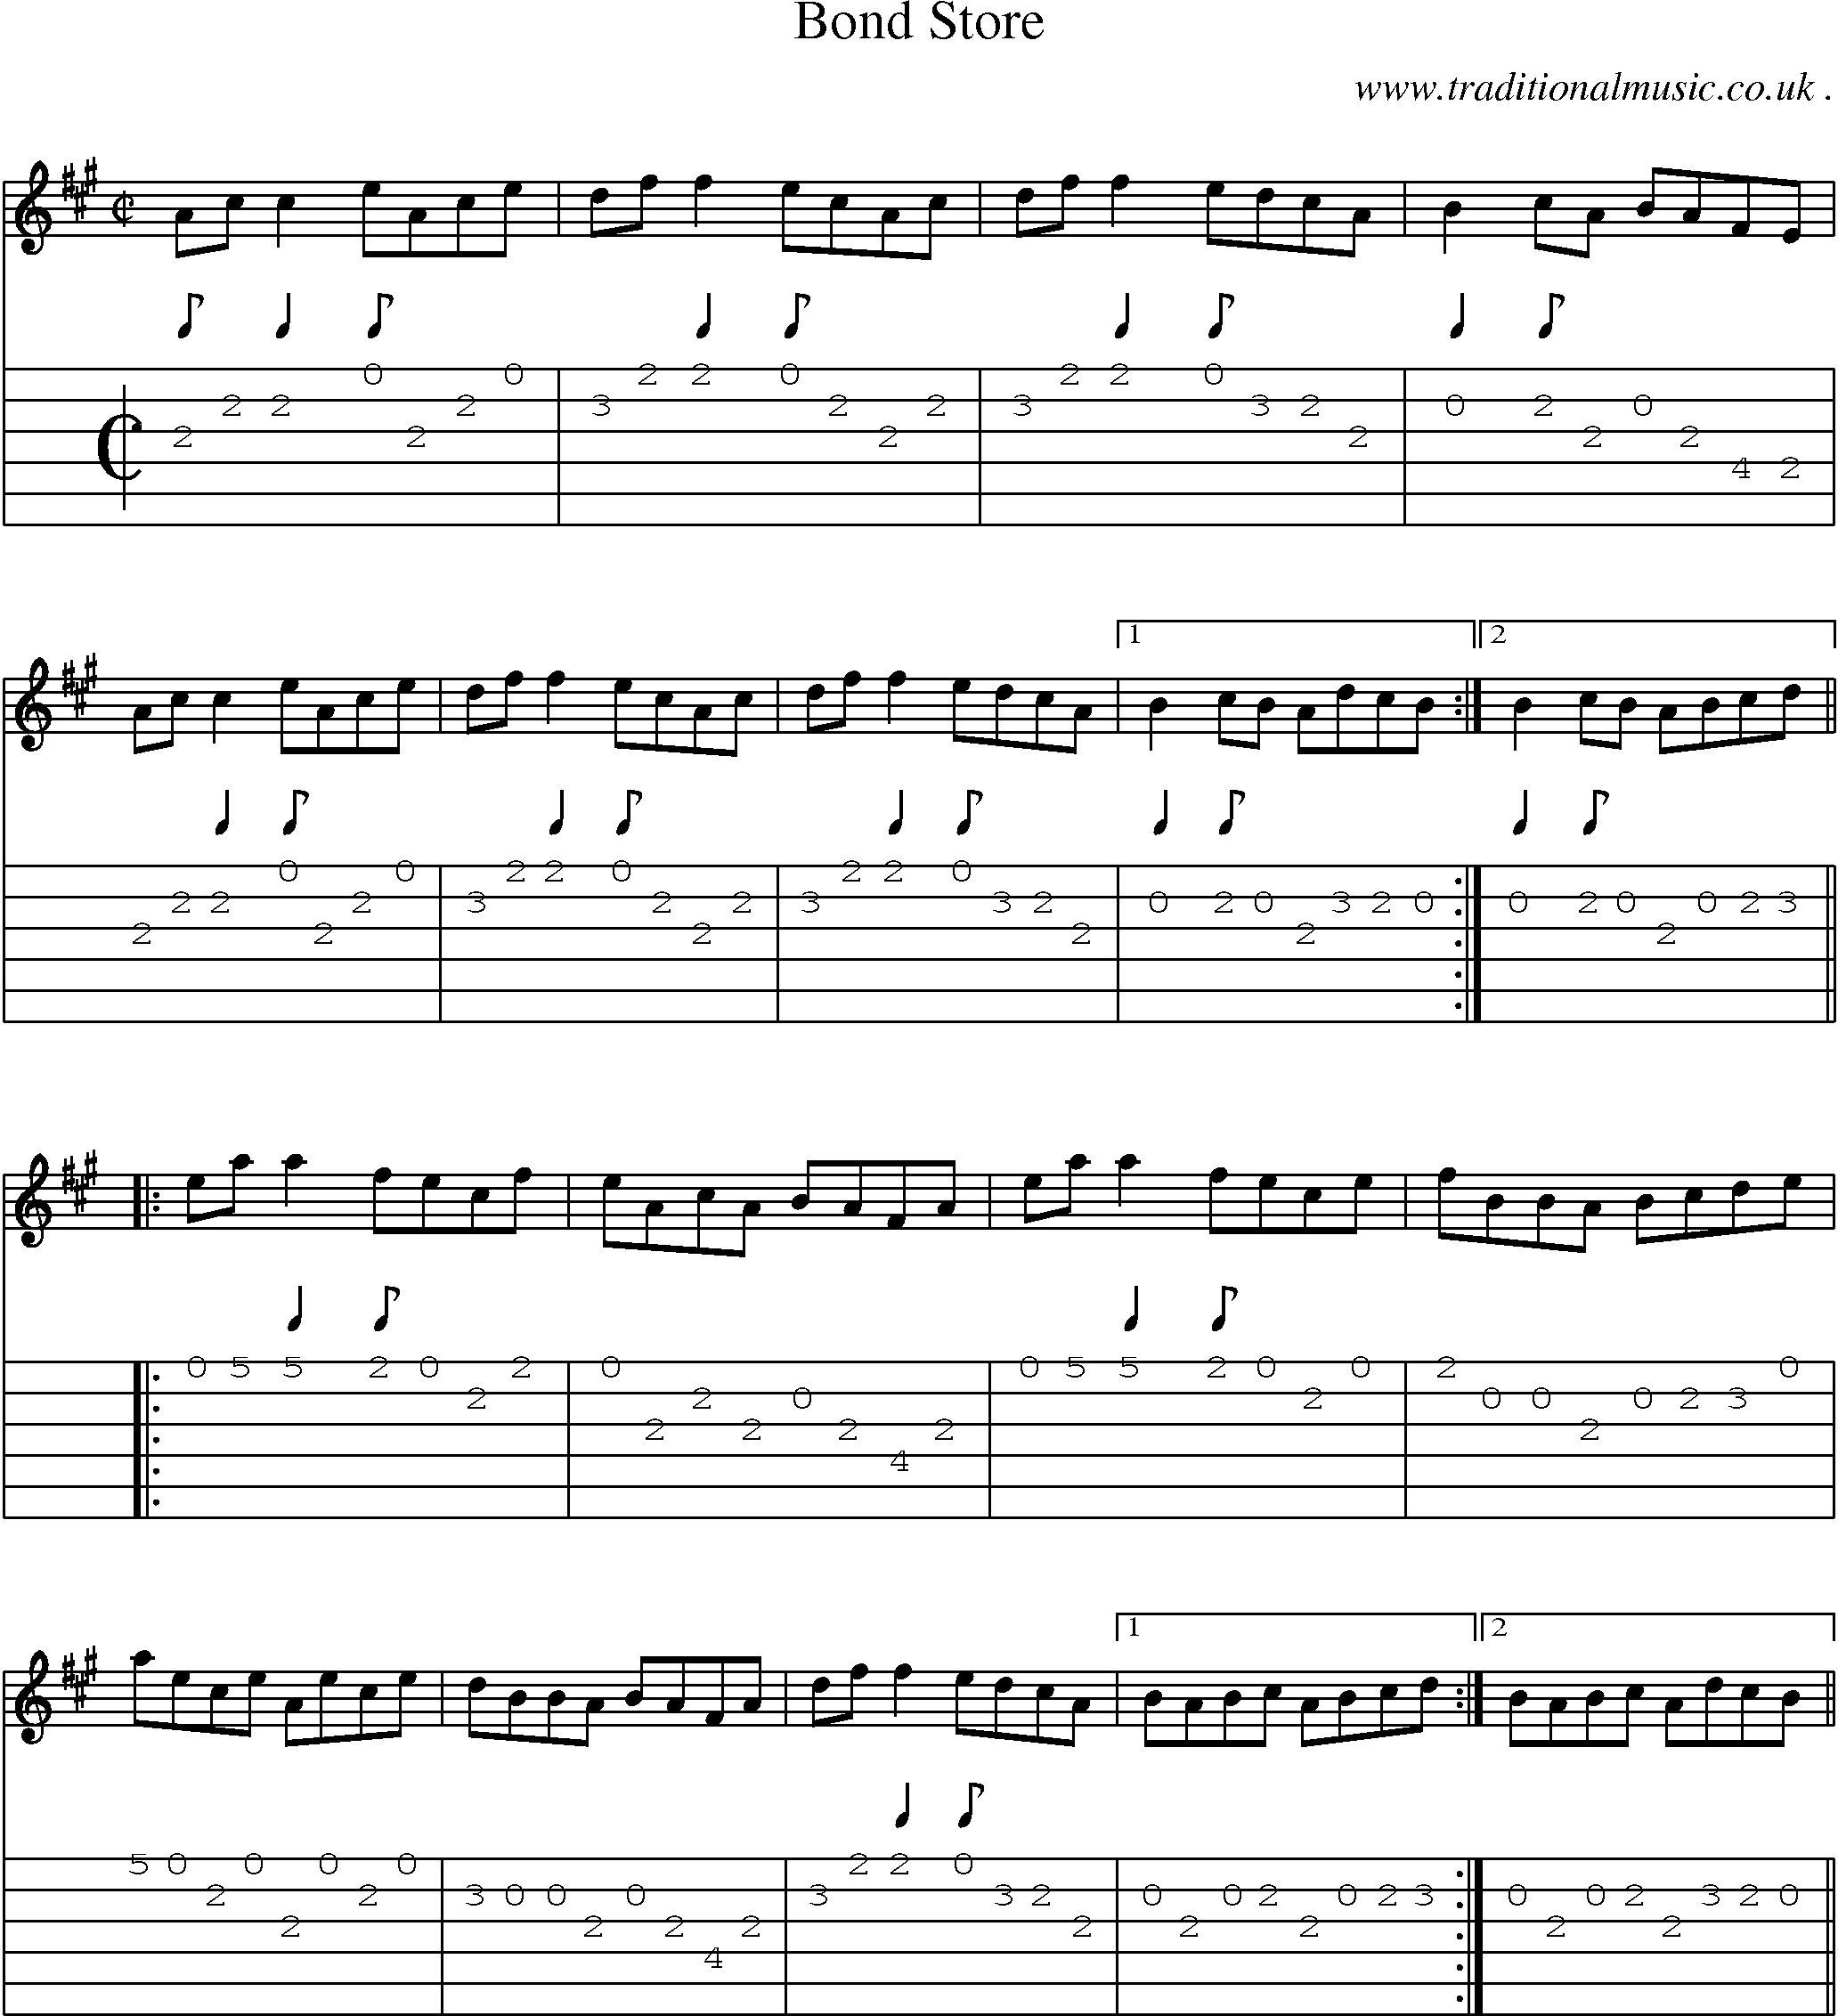 Sheet-Music and Guitar Tabs for Bond Store